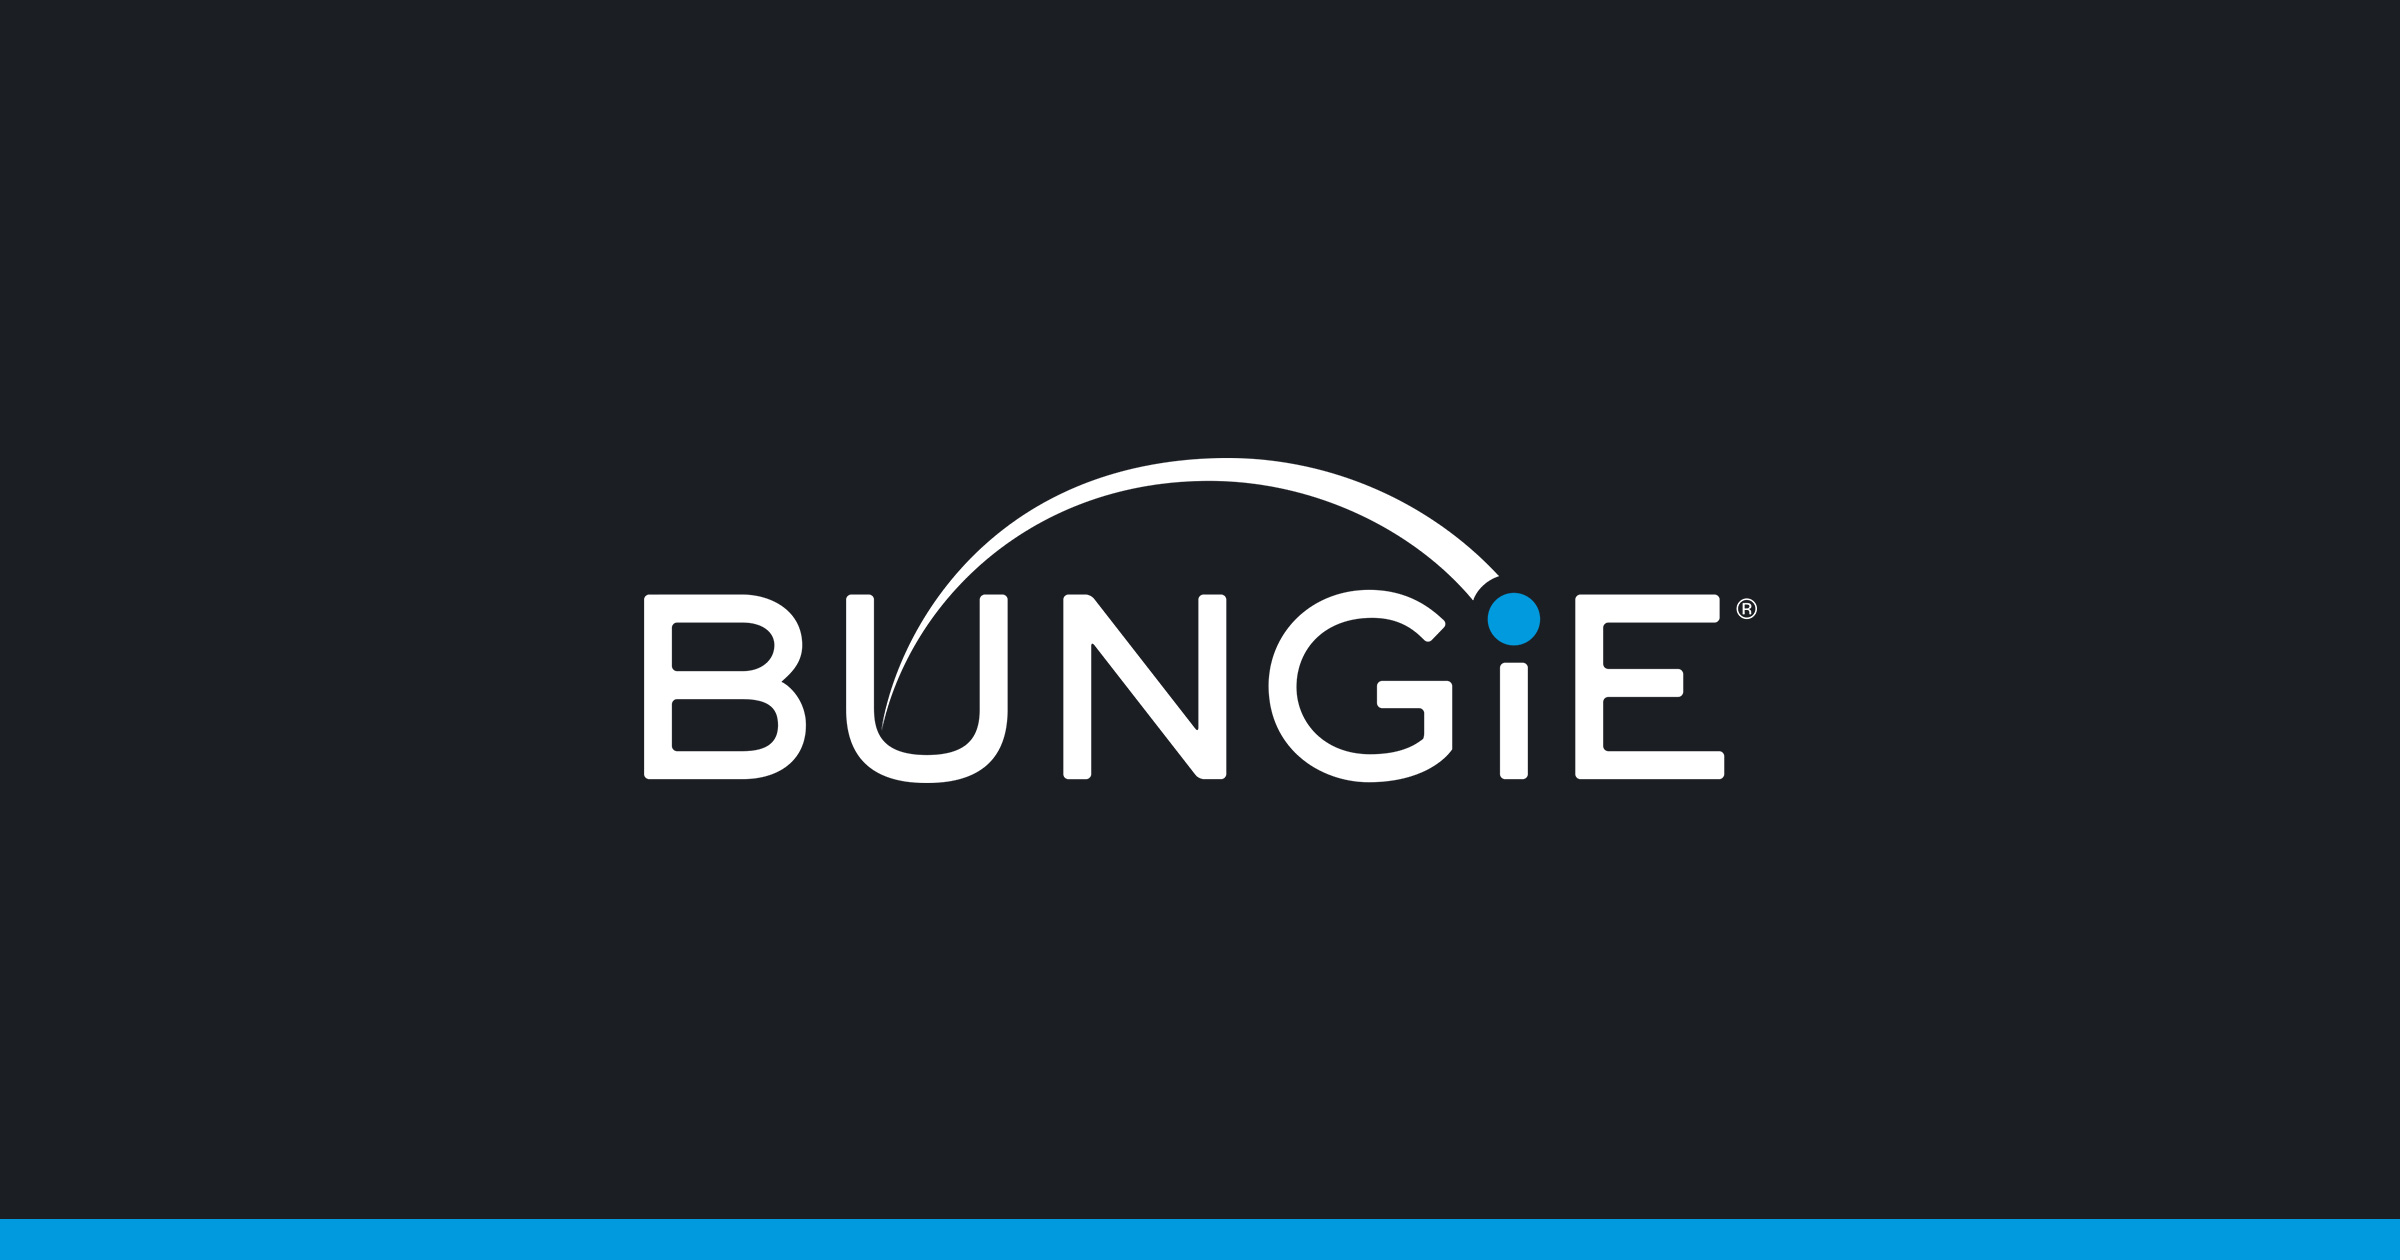  Bungie Games - The Ultimate Collection for Endless Fun!